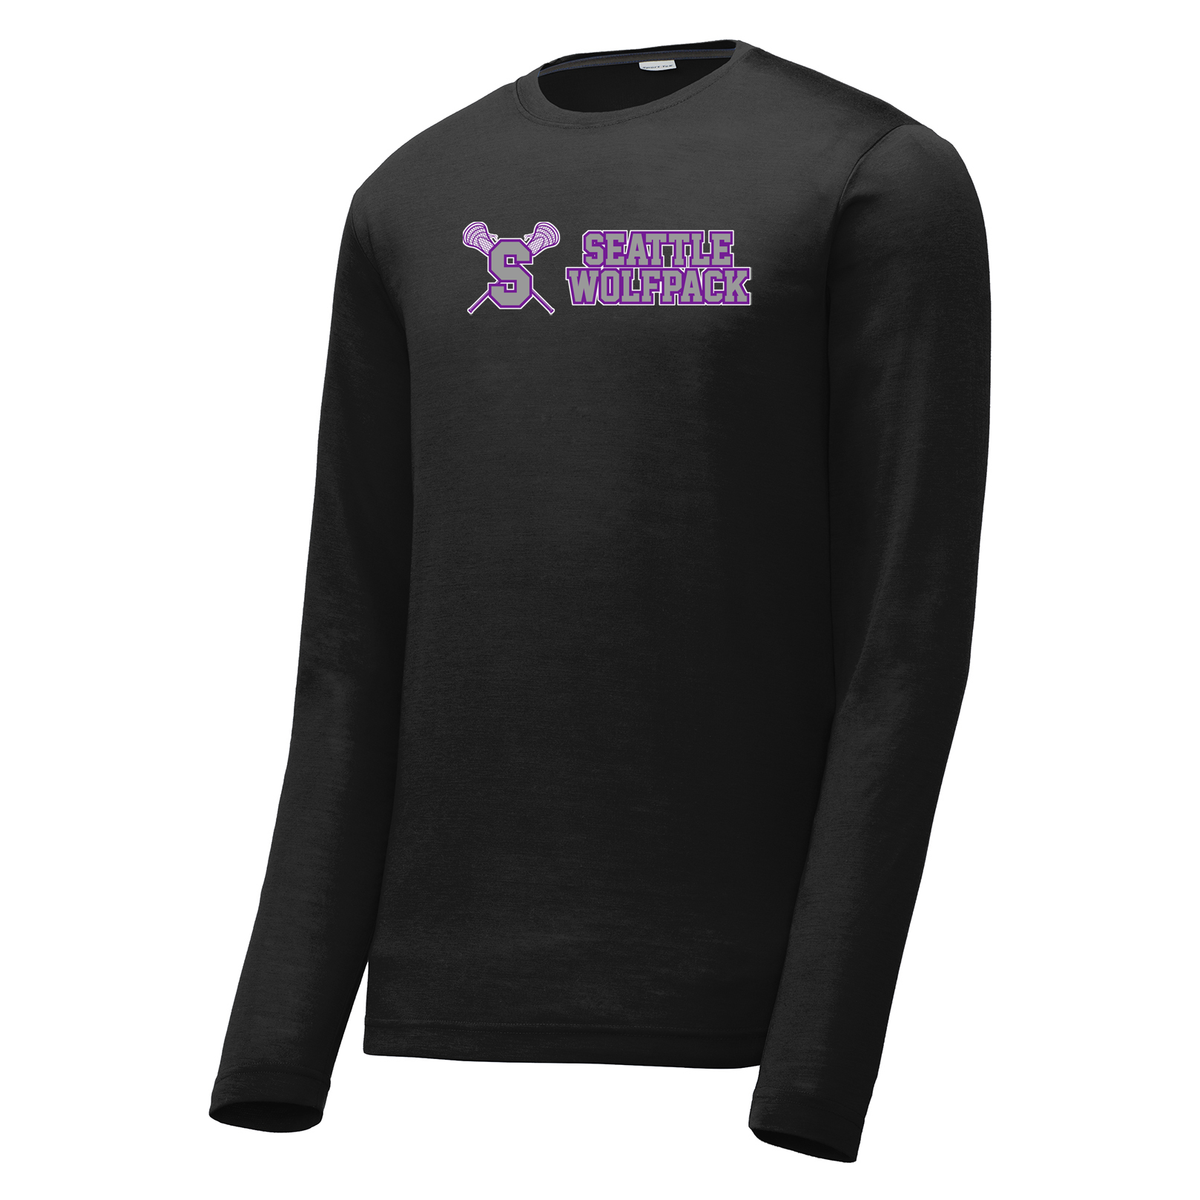 Seattle Wolfpack Long Sleeve CottonTouch Performance Shirt